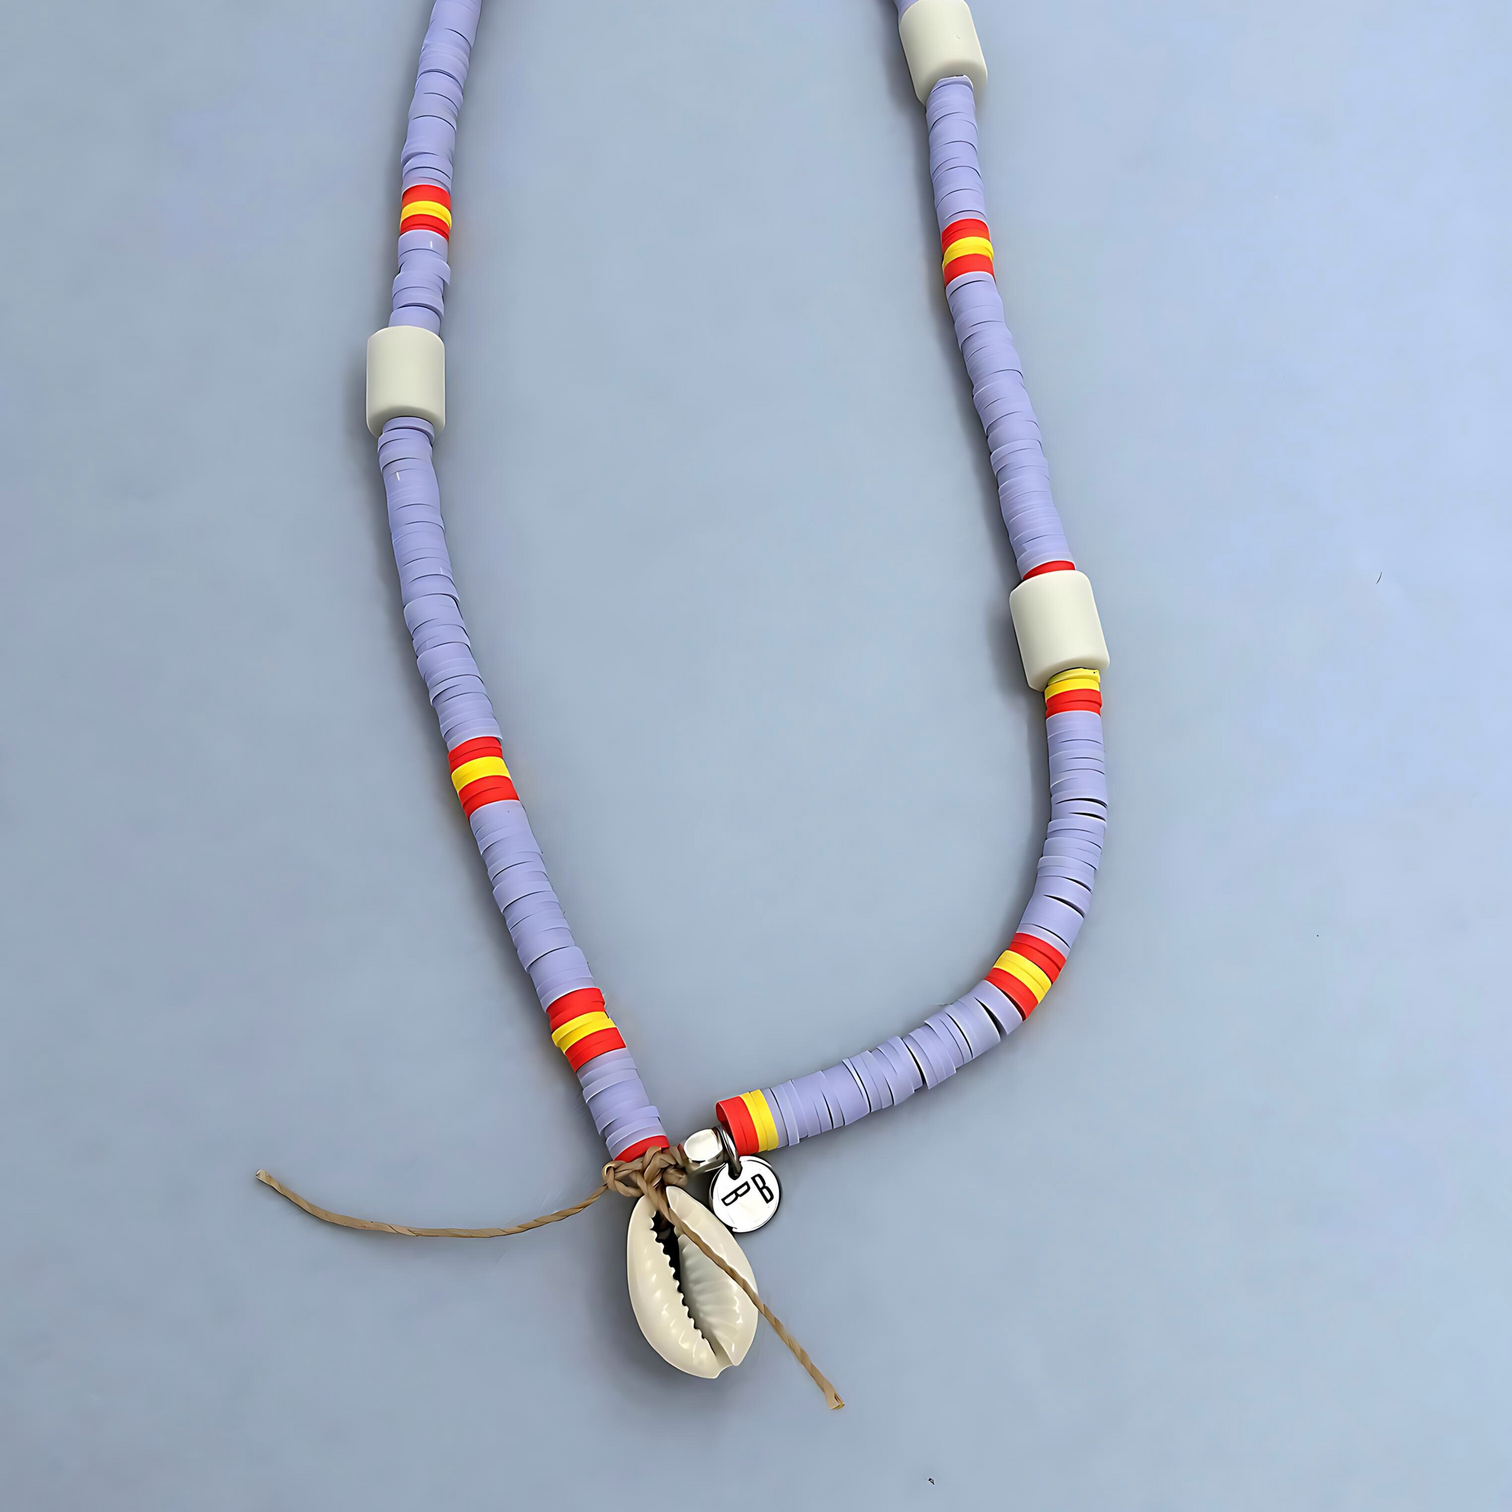 wow_by_LeBijouBijou_Lavender_The cool surfer's look anti-tick dog necklace. Detail shot